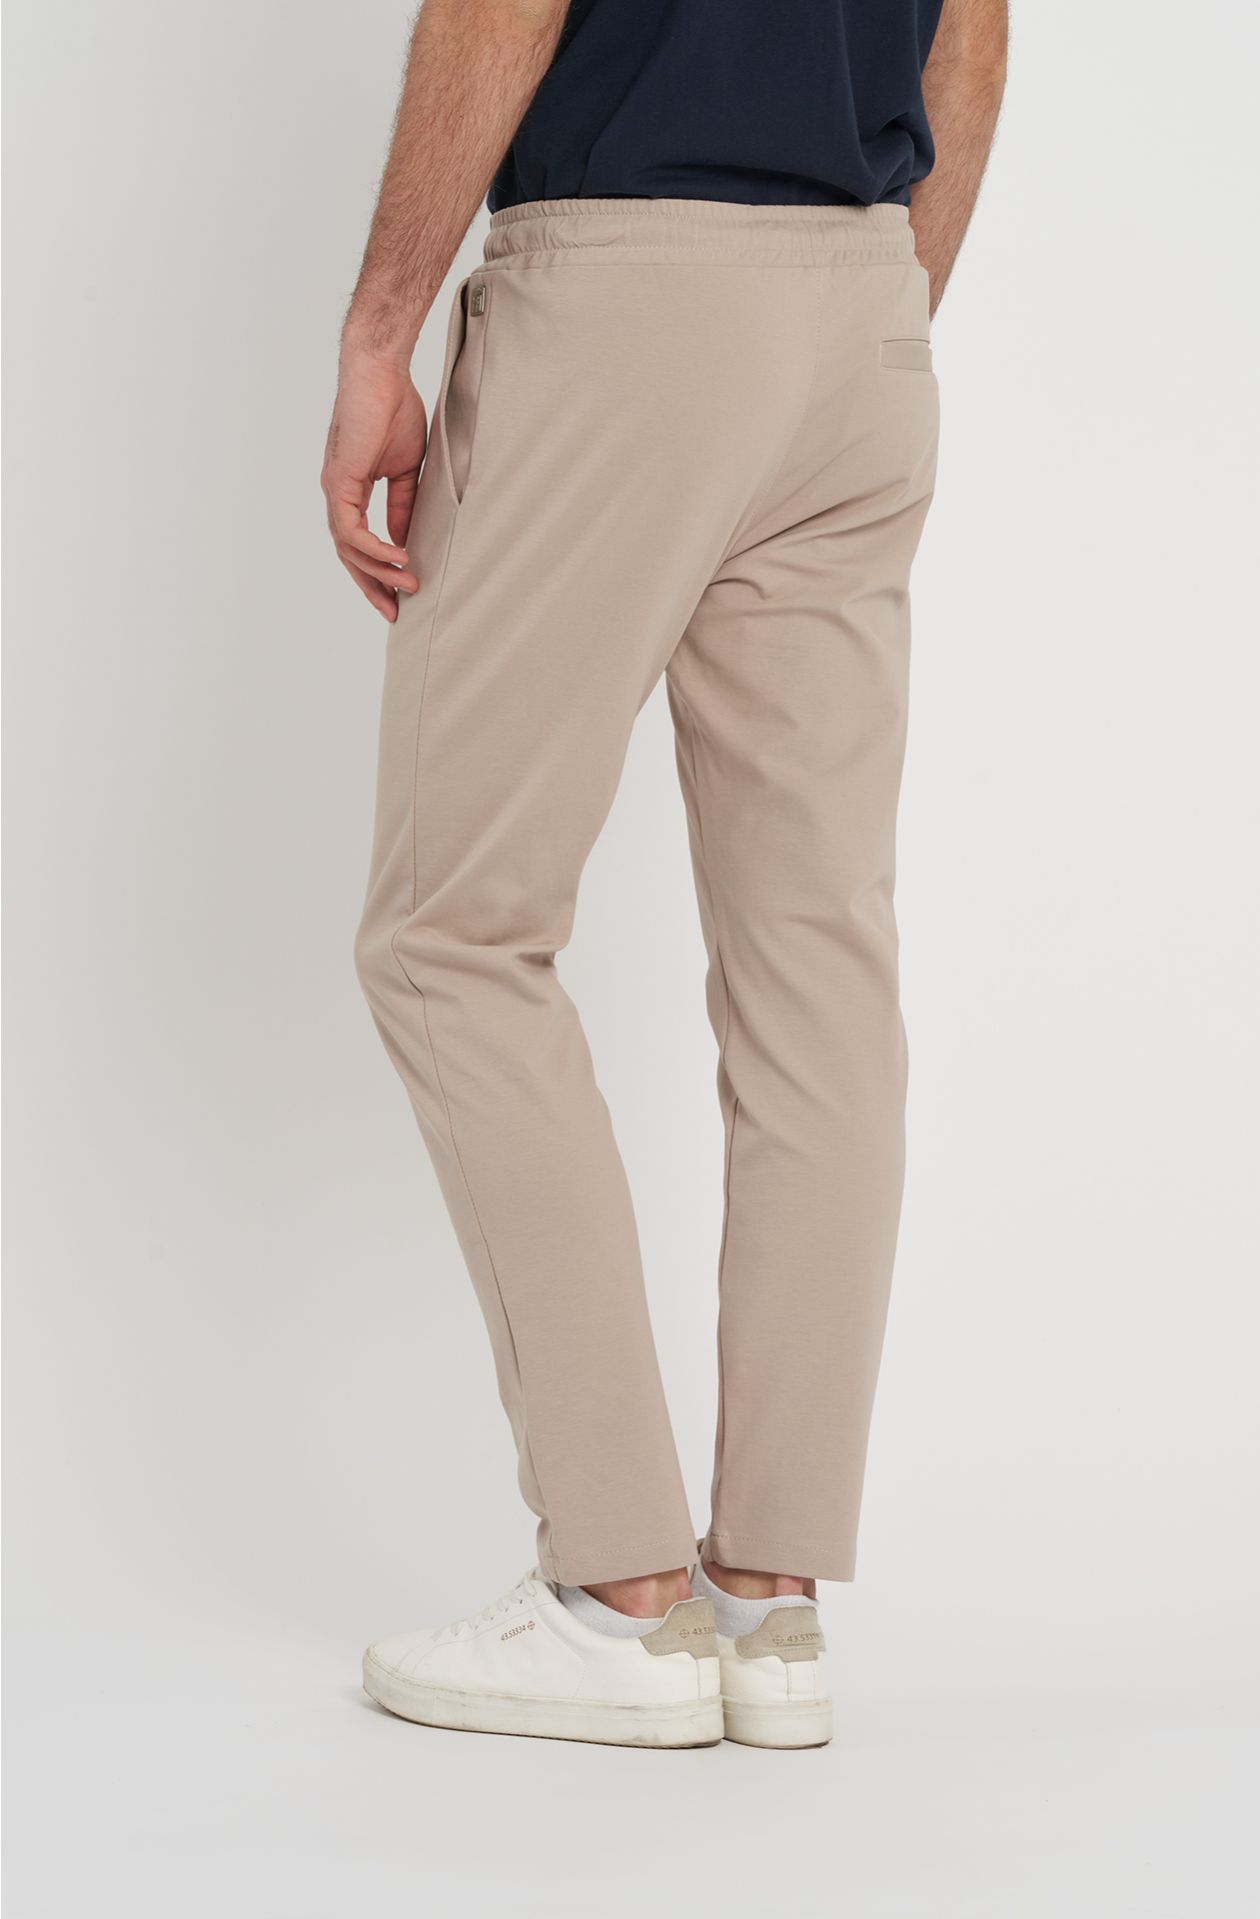 Free time trousers in cotton blend